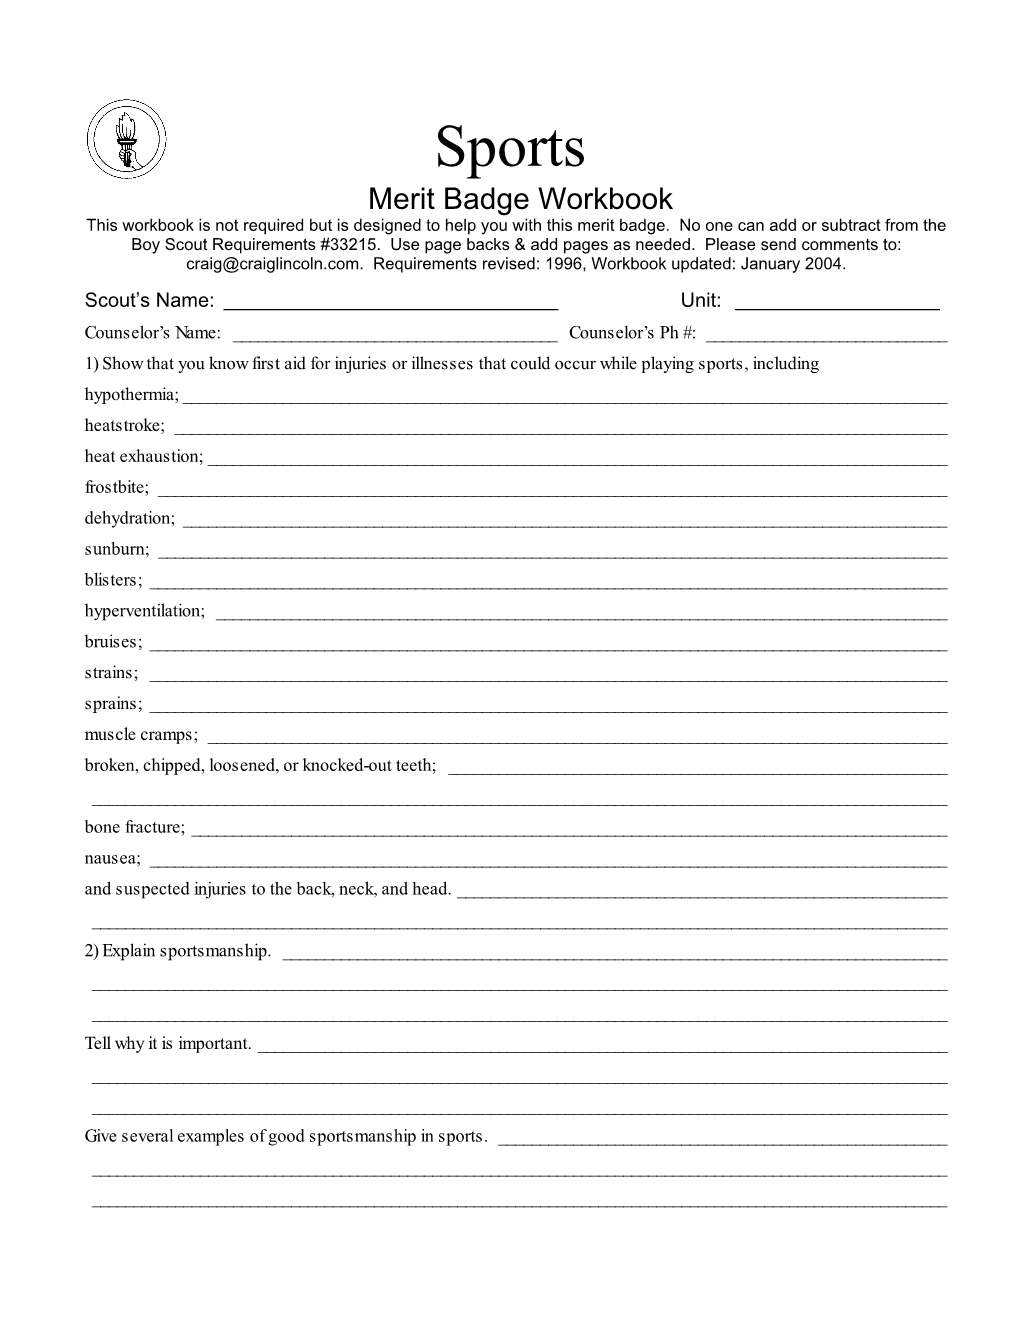 Sports Merit Badge Workbook This Workbook Is Not Required but Is Designed to Help You with This Merit Badge